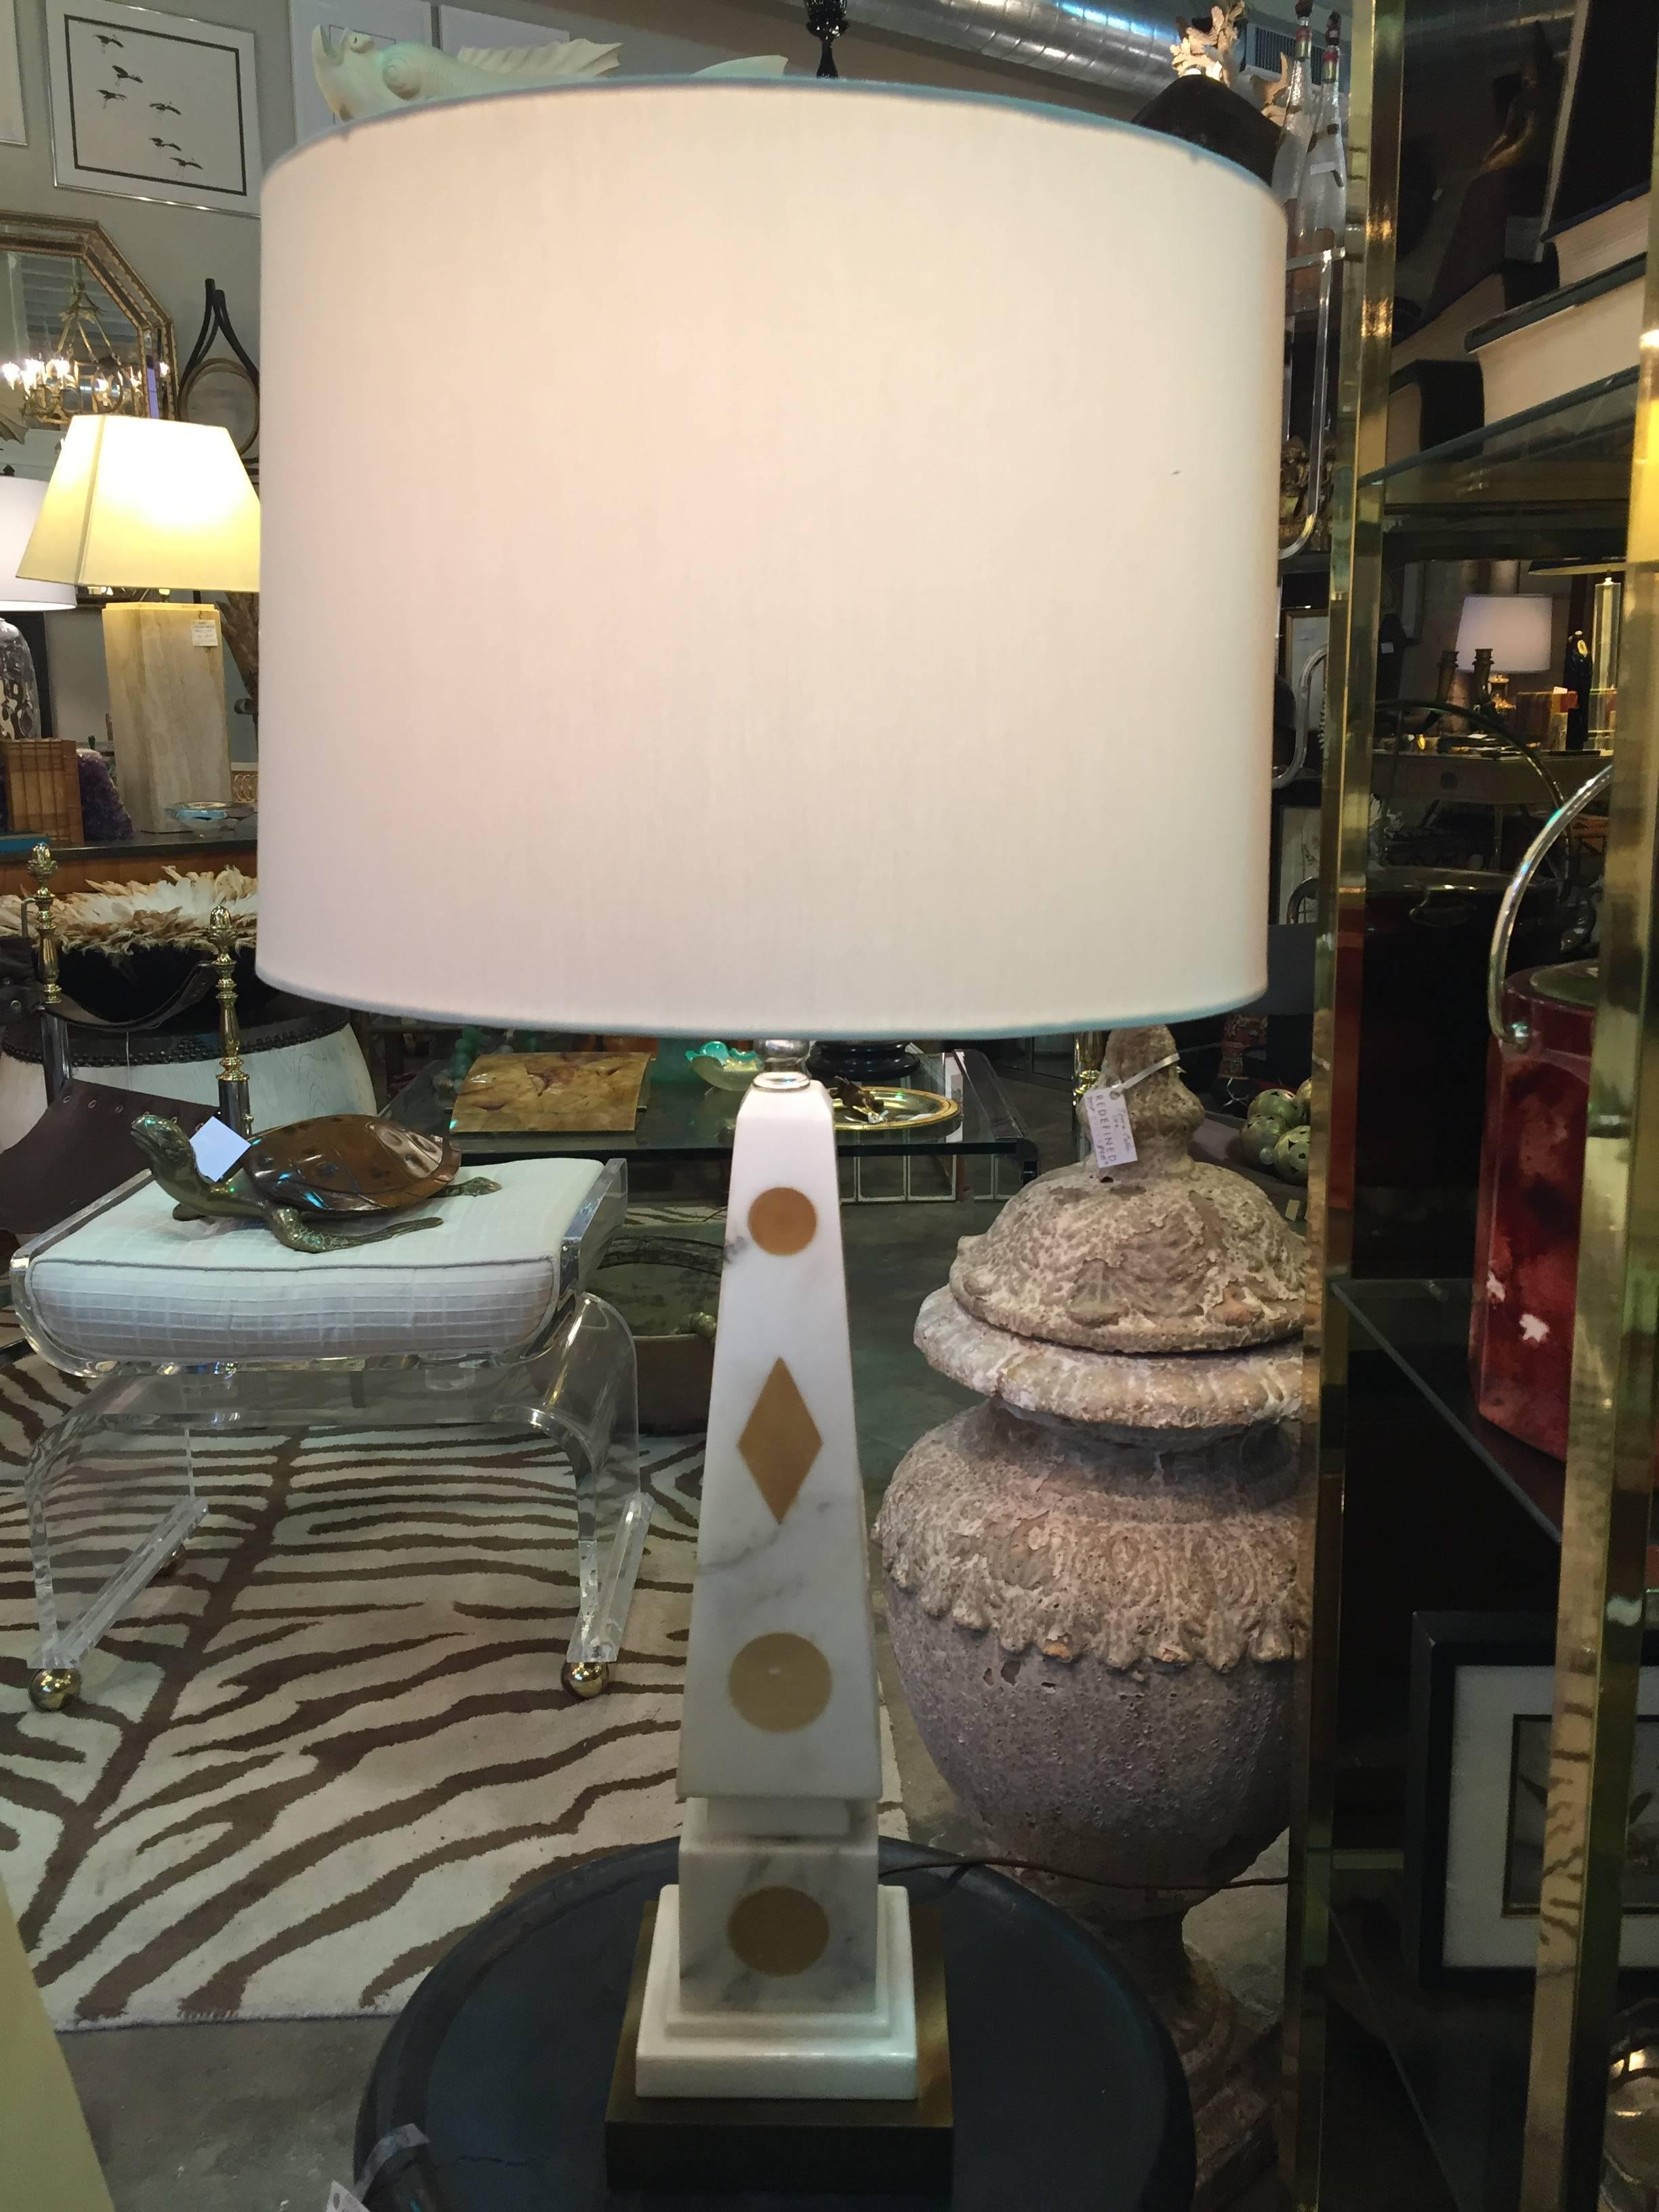 Pair of mid-20th century Italian marble obelisk table lamps having subtle gold geometric shapes against the white marble ground. New linen drum shades are included.